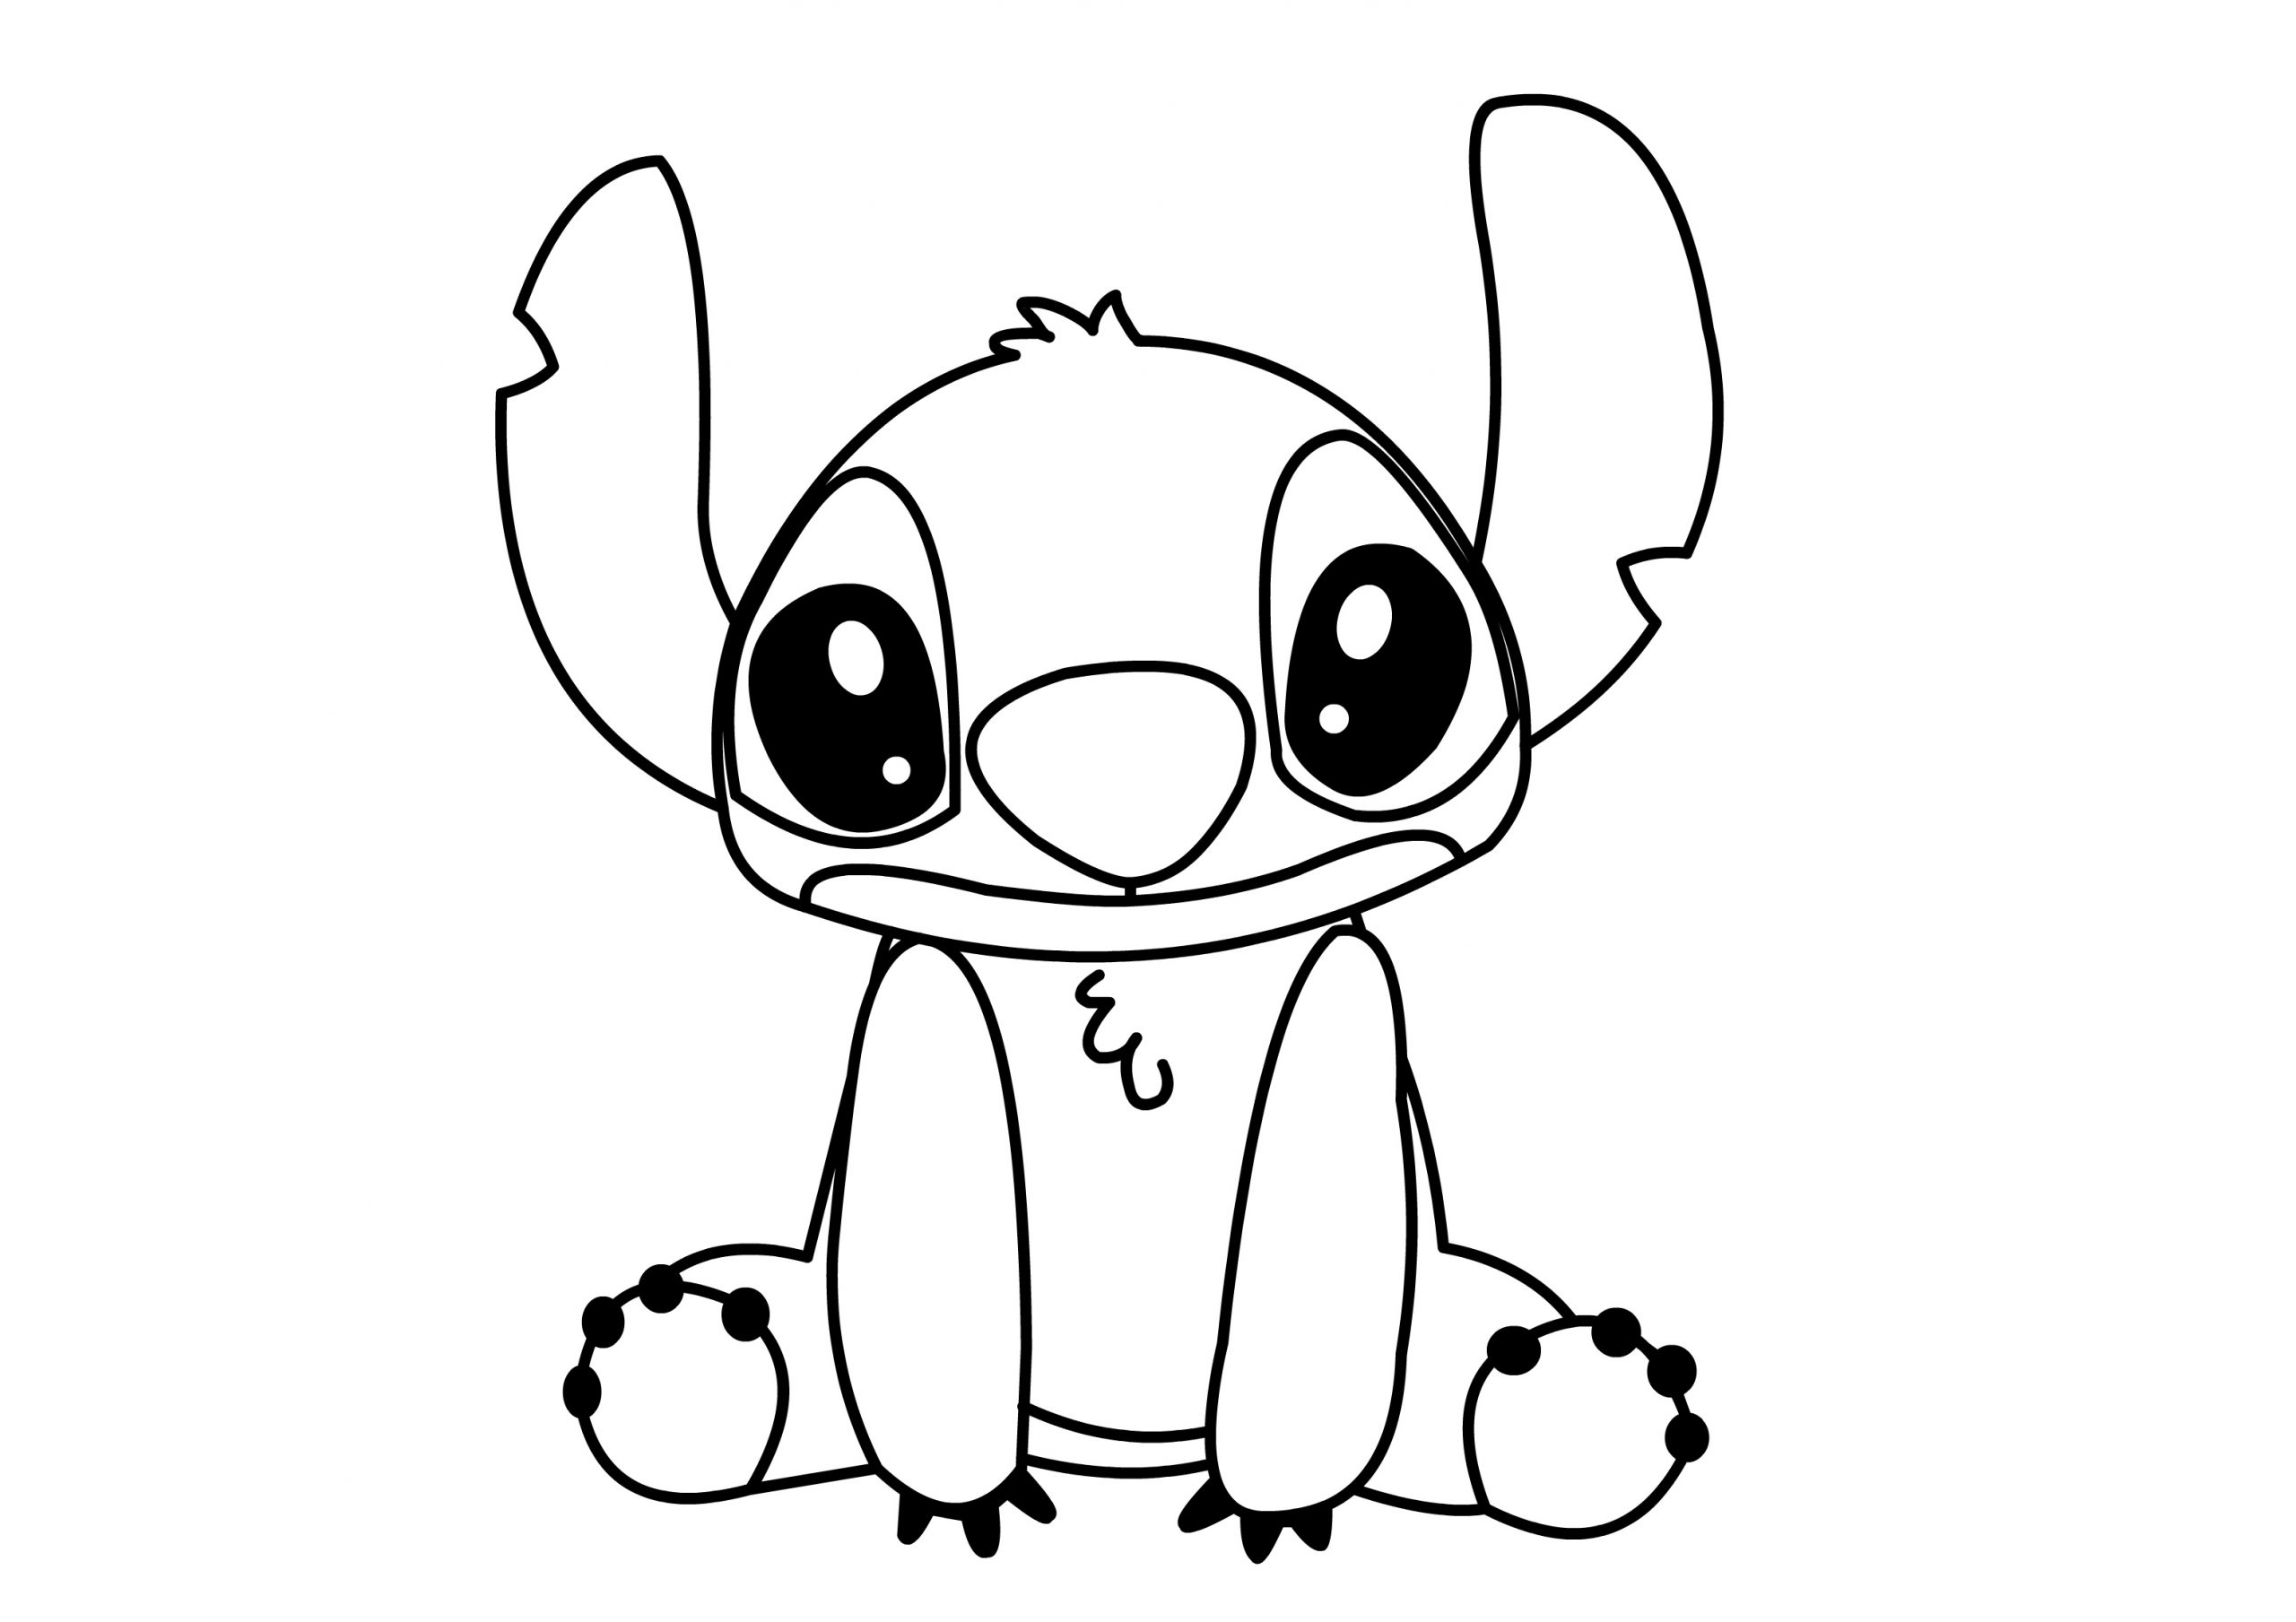 Stitch Coloring Pages Cartoon Coloring Pages Cool Coloring Pages ...